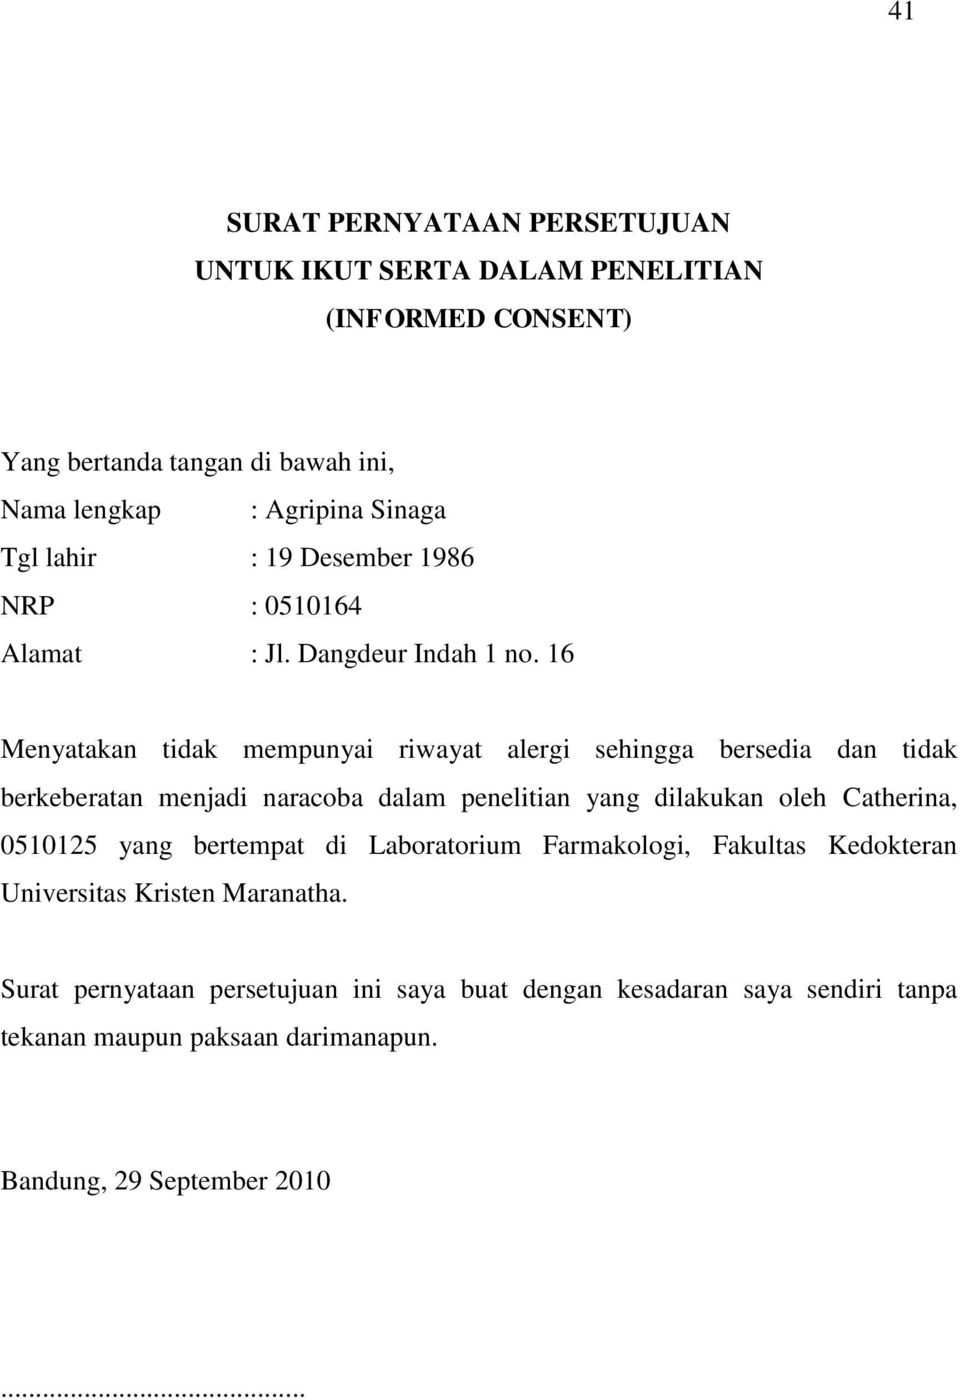 Detail Informed Consent Contoh Nomer 16